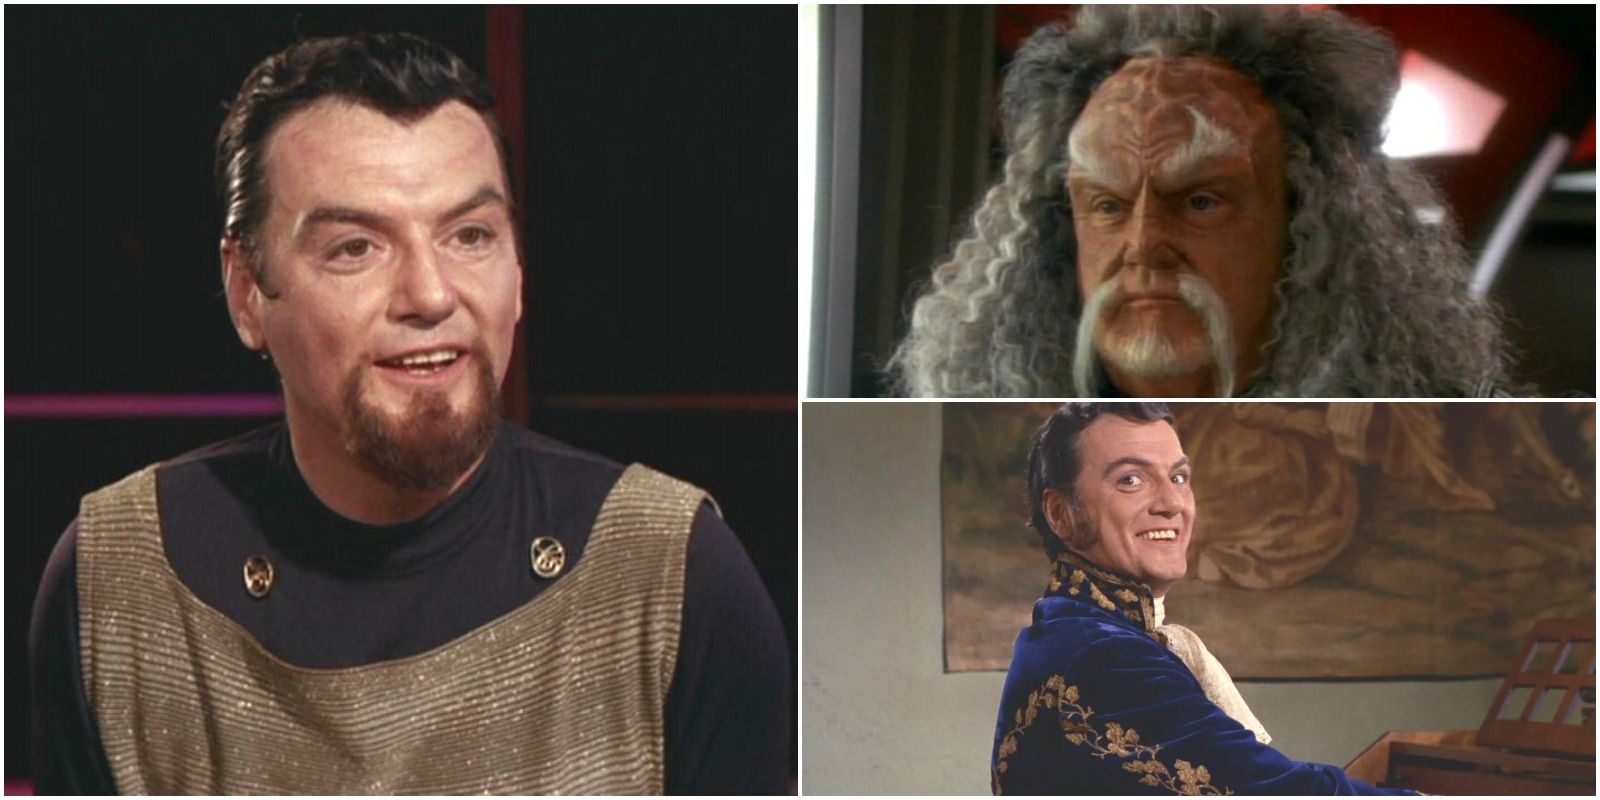 Trelane, Q-like entity, from TOS and Koloth from DS9